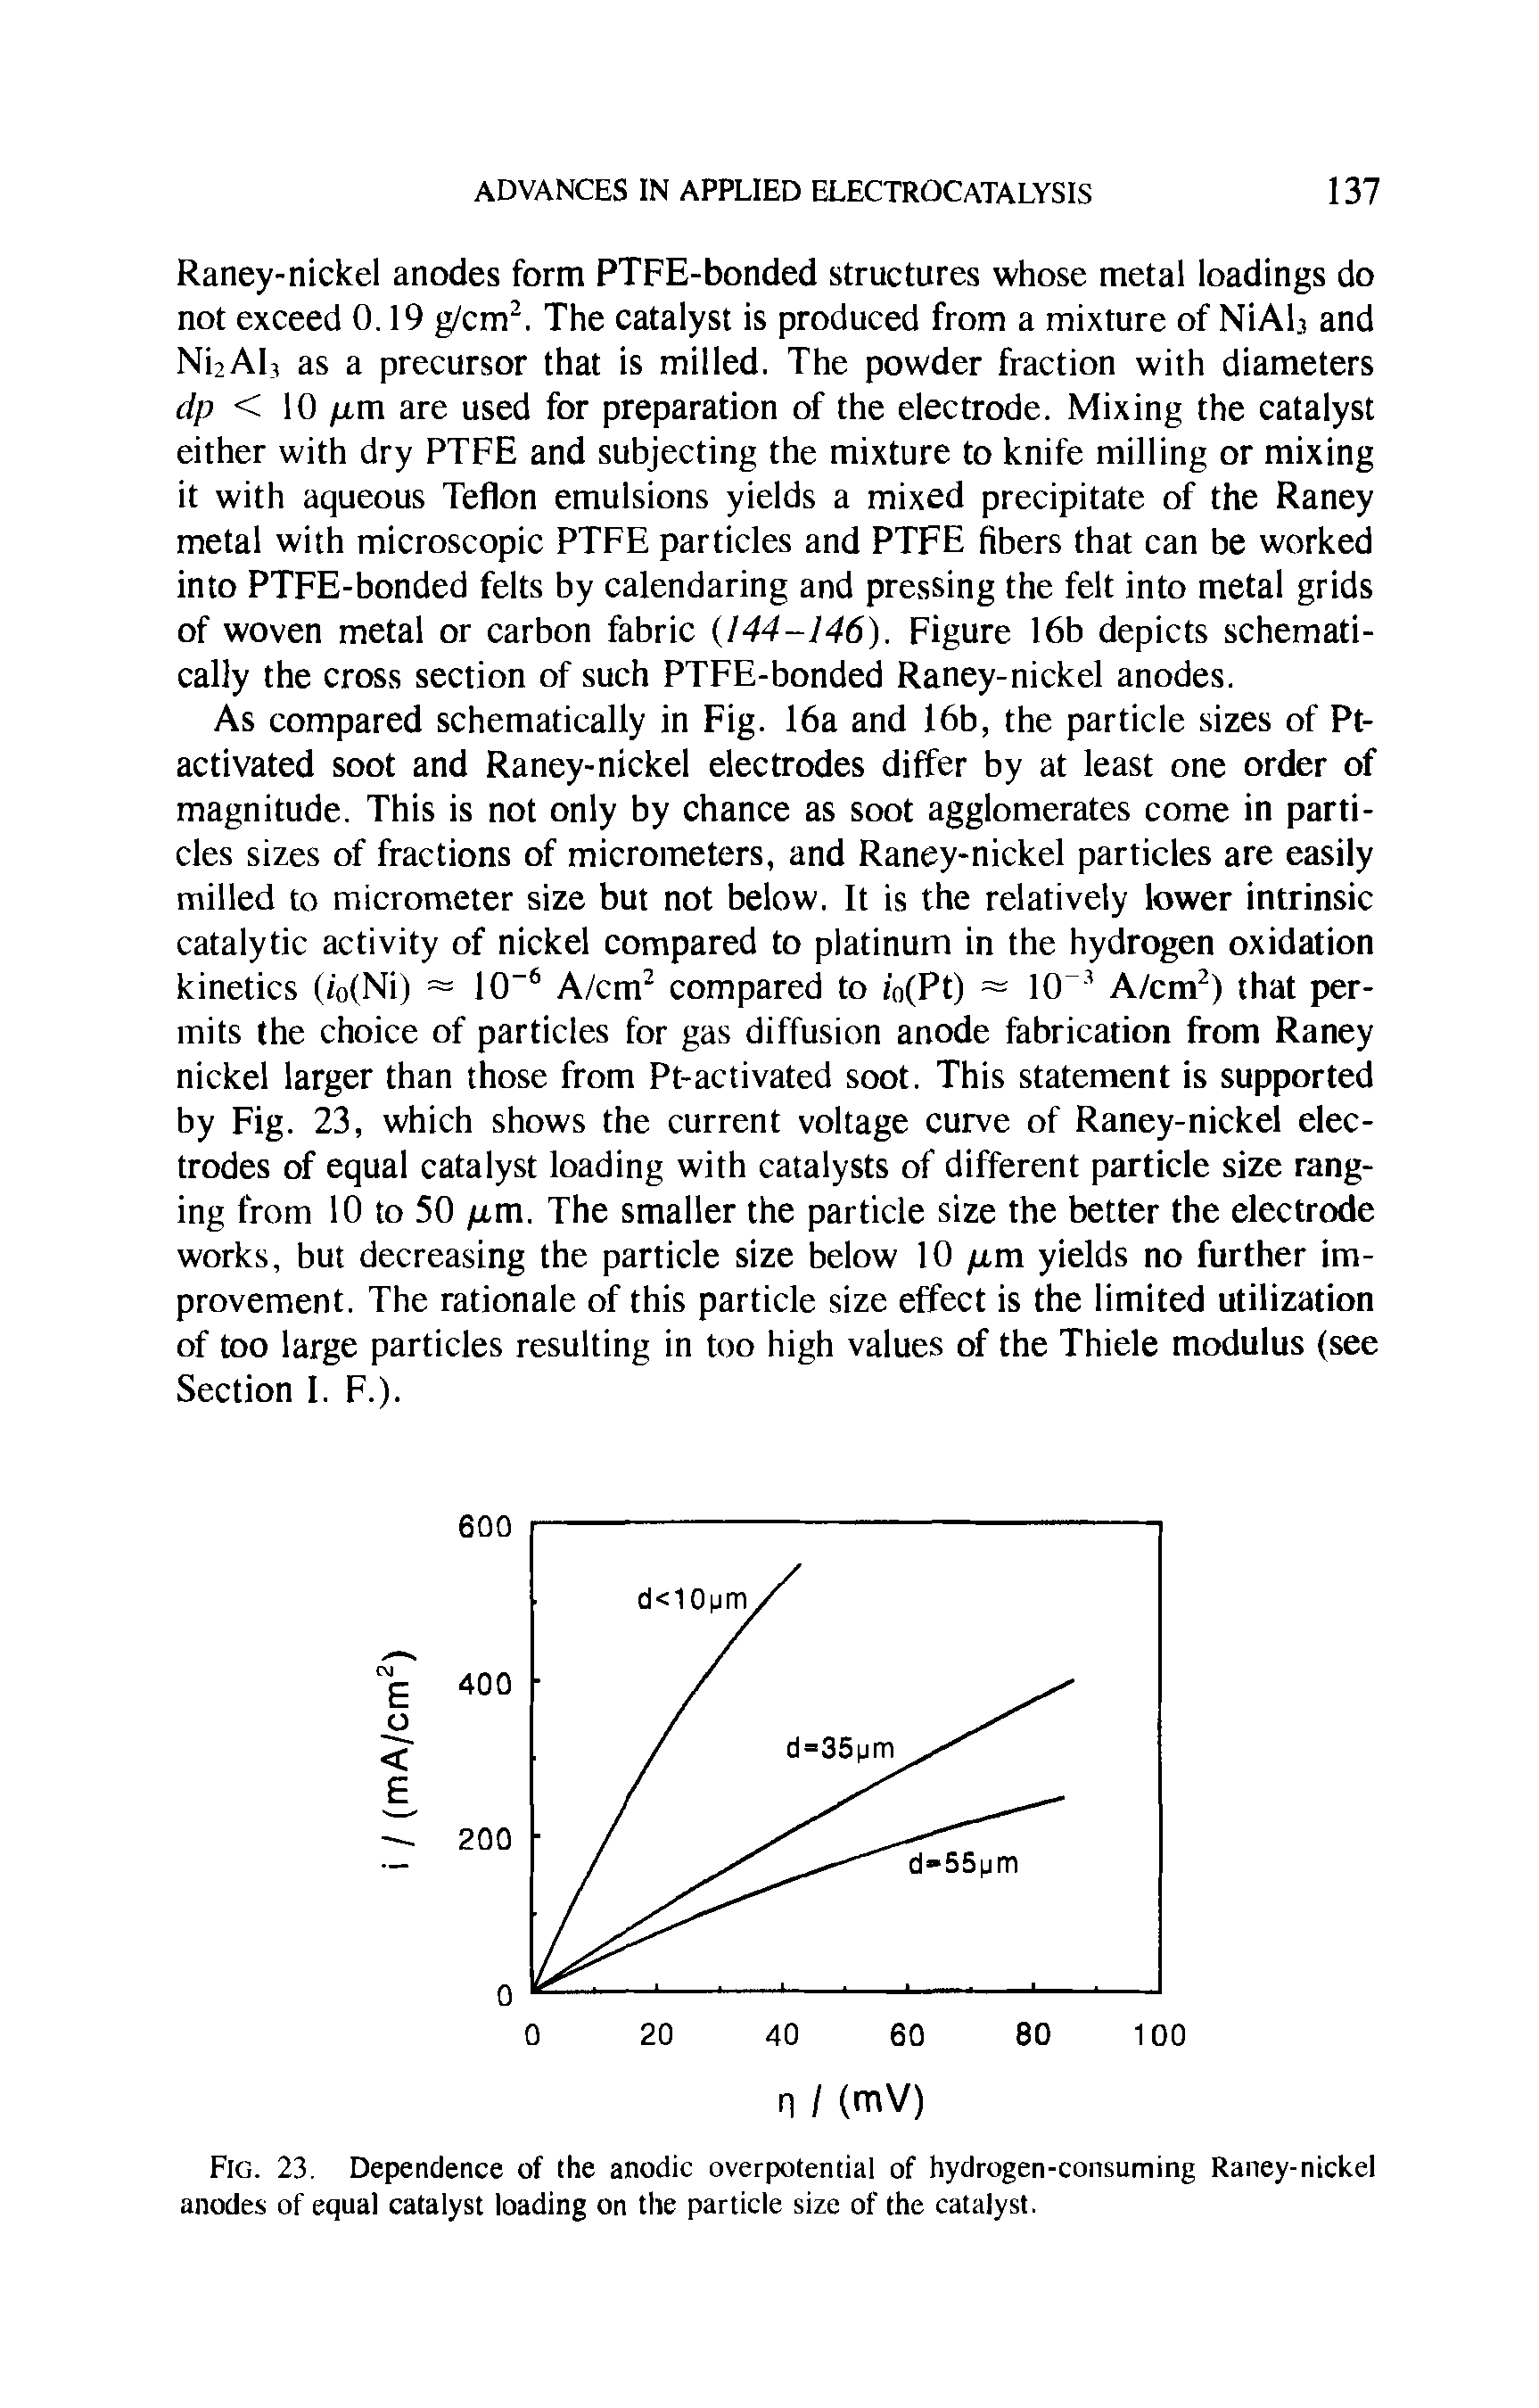 Fig. 23. Dependence of the anodic overpotential of hydrogen-consuming Raney-nickel anodes of equal catalyst loading on the particle size of the catalyst.